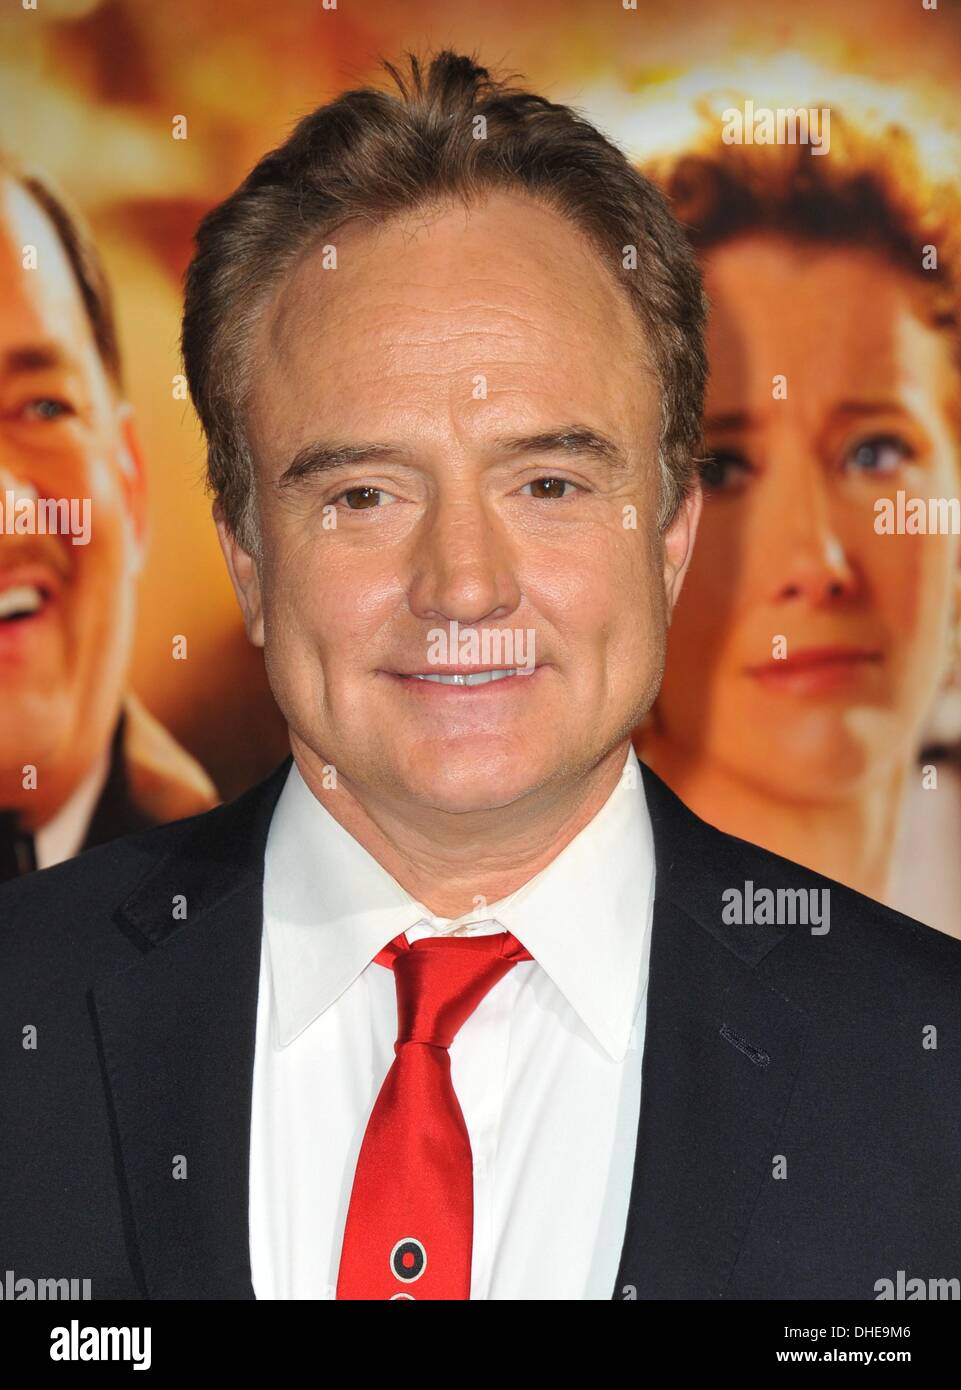 Los Angeles, CA, USA. 7th Nov, 2013. Bradley Whitford at arrivals for SAVING MR. BANKS Opening Night Gala Screening at AFI FEST 2013, TCL Chinese 6 Theatres (formerly Grauman's), Los Angeles, CA November 7, 2013. Credit:  Dee Cercone/Everett Collection/Alamy Live News Stock Photo